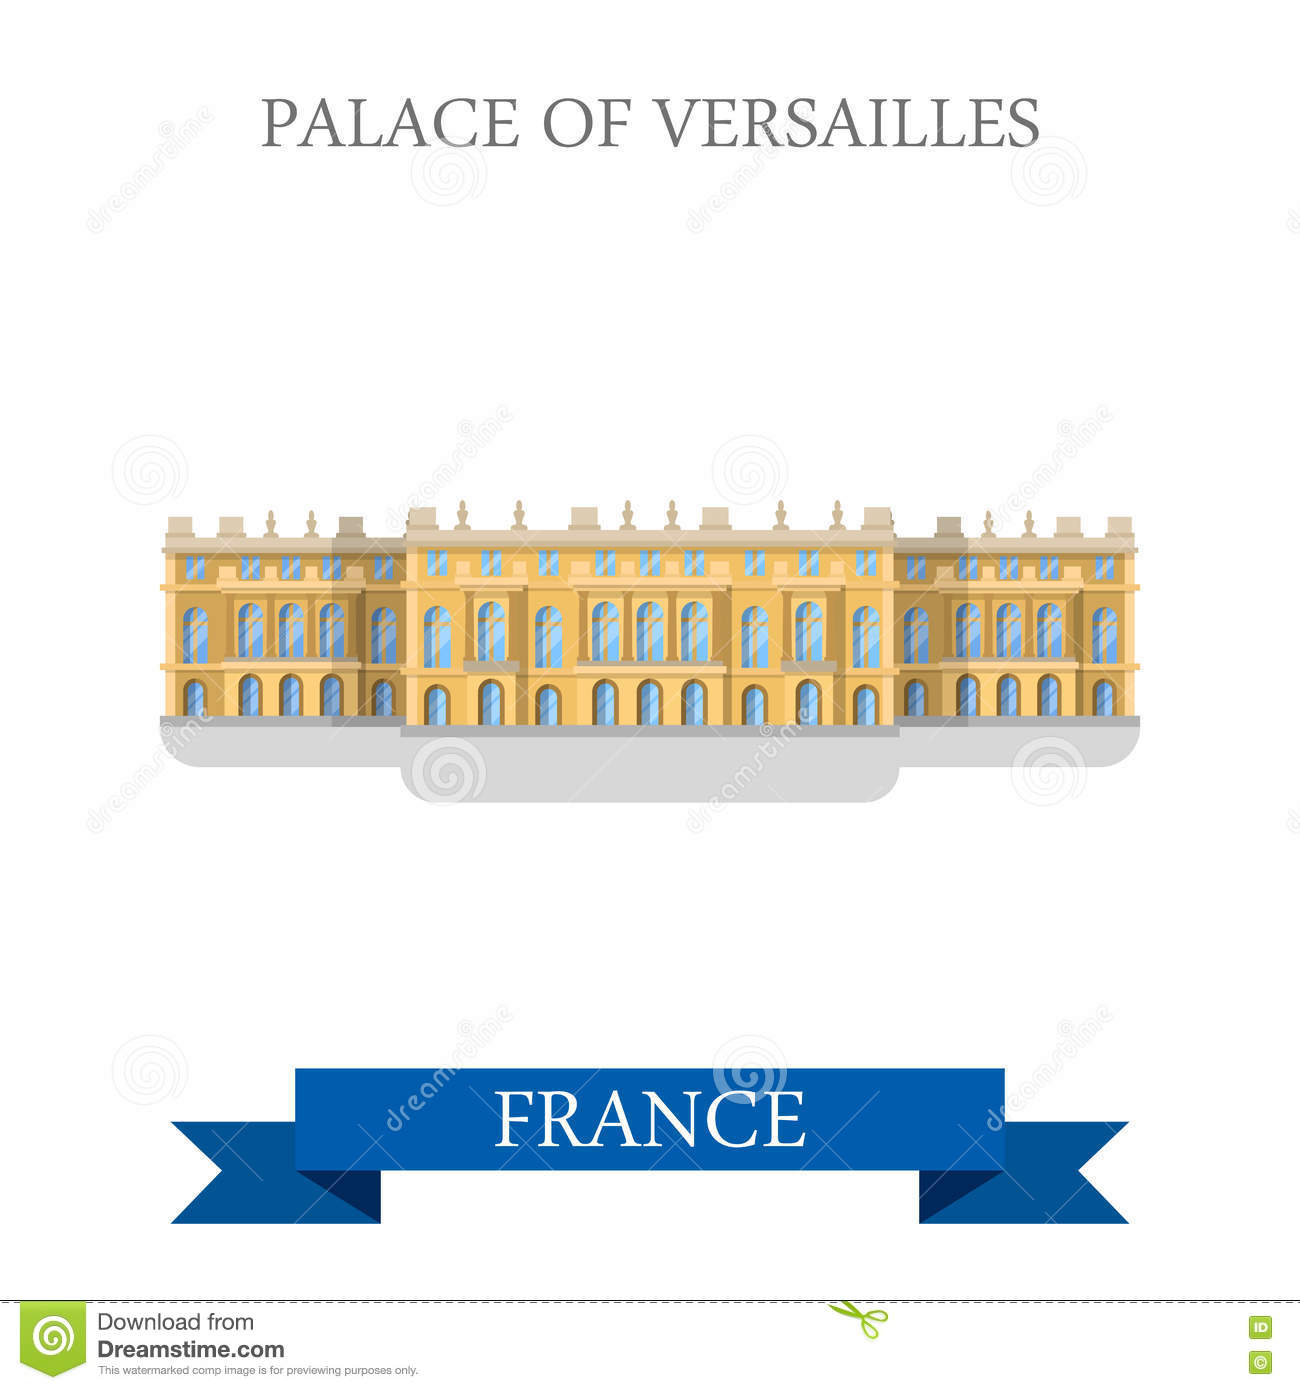 Versailles palace clipart 20 free Cliparts | Download images on ...